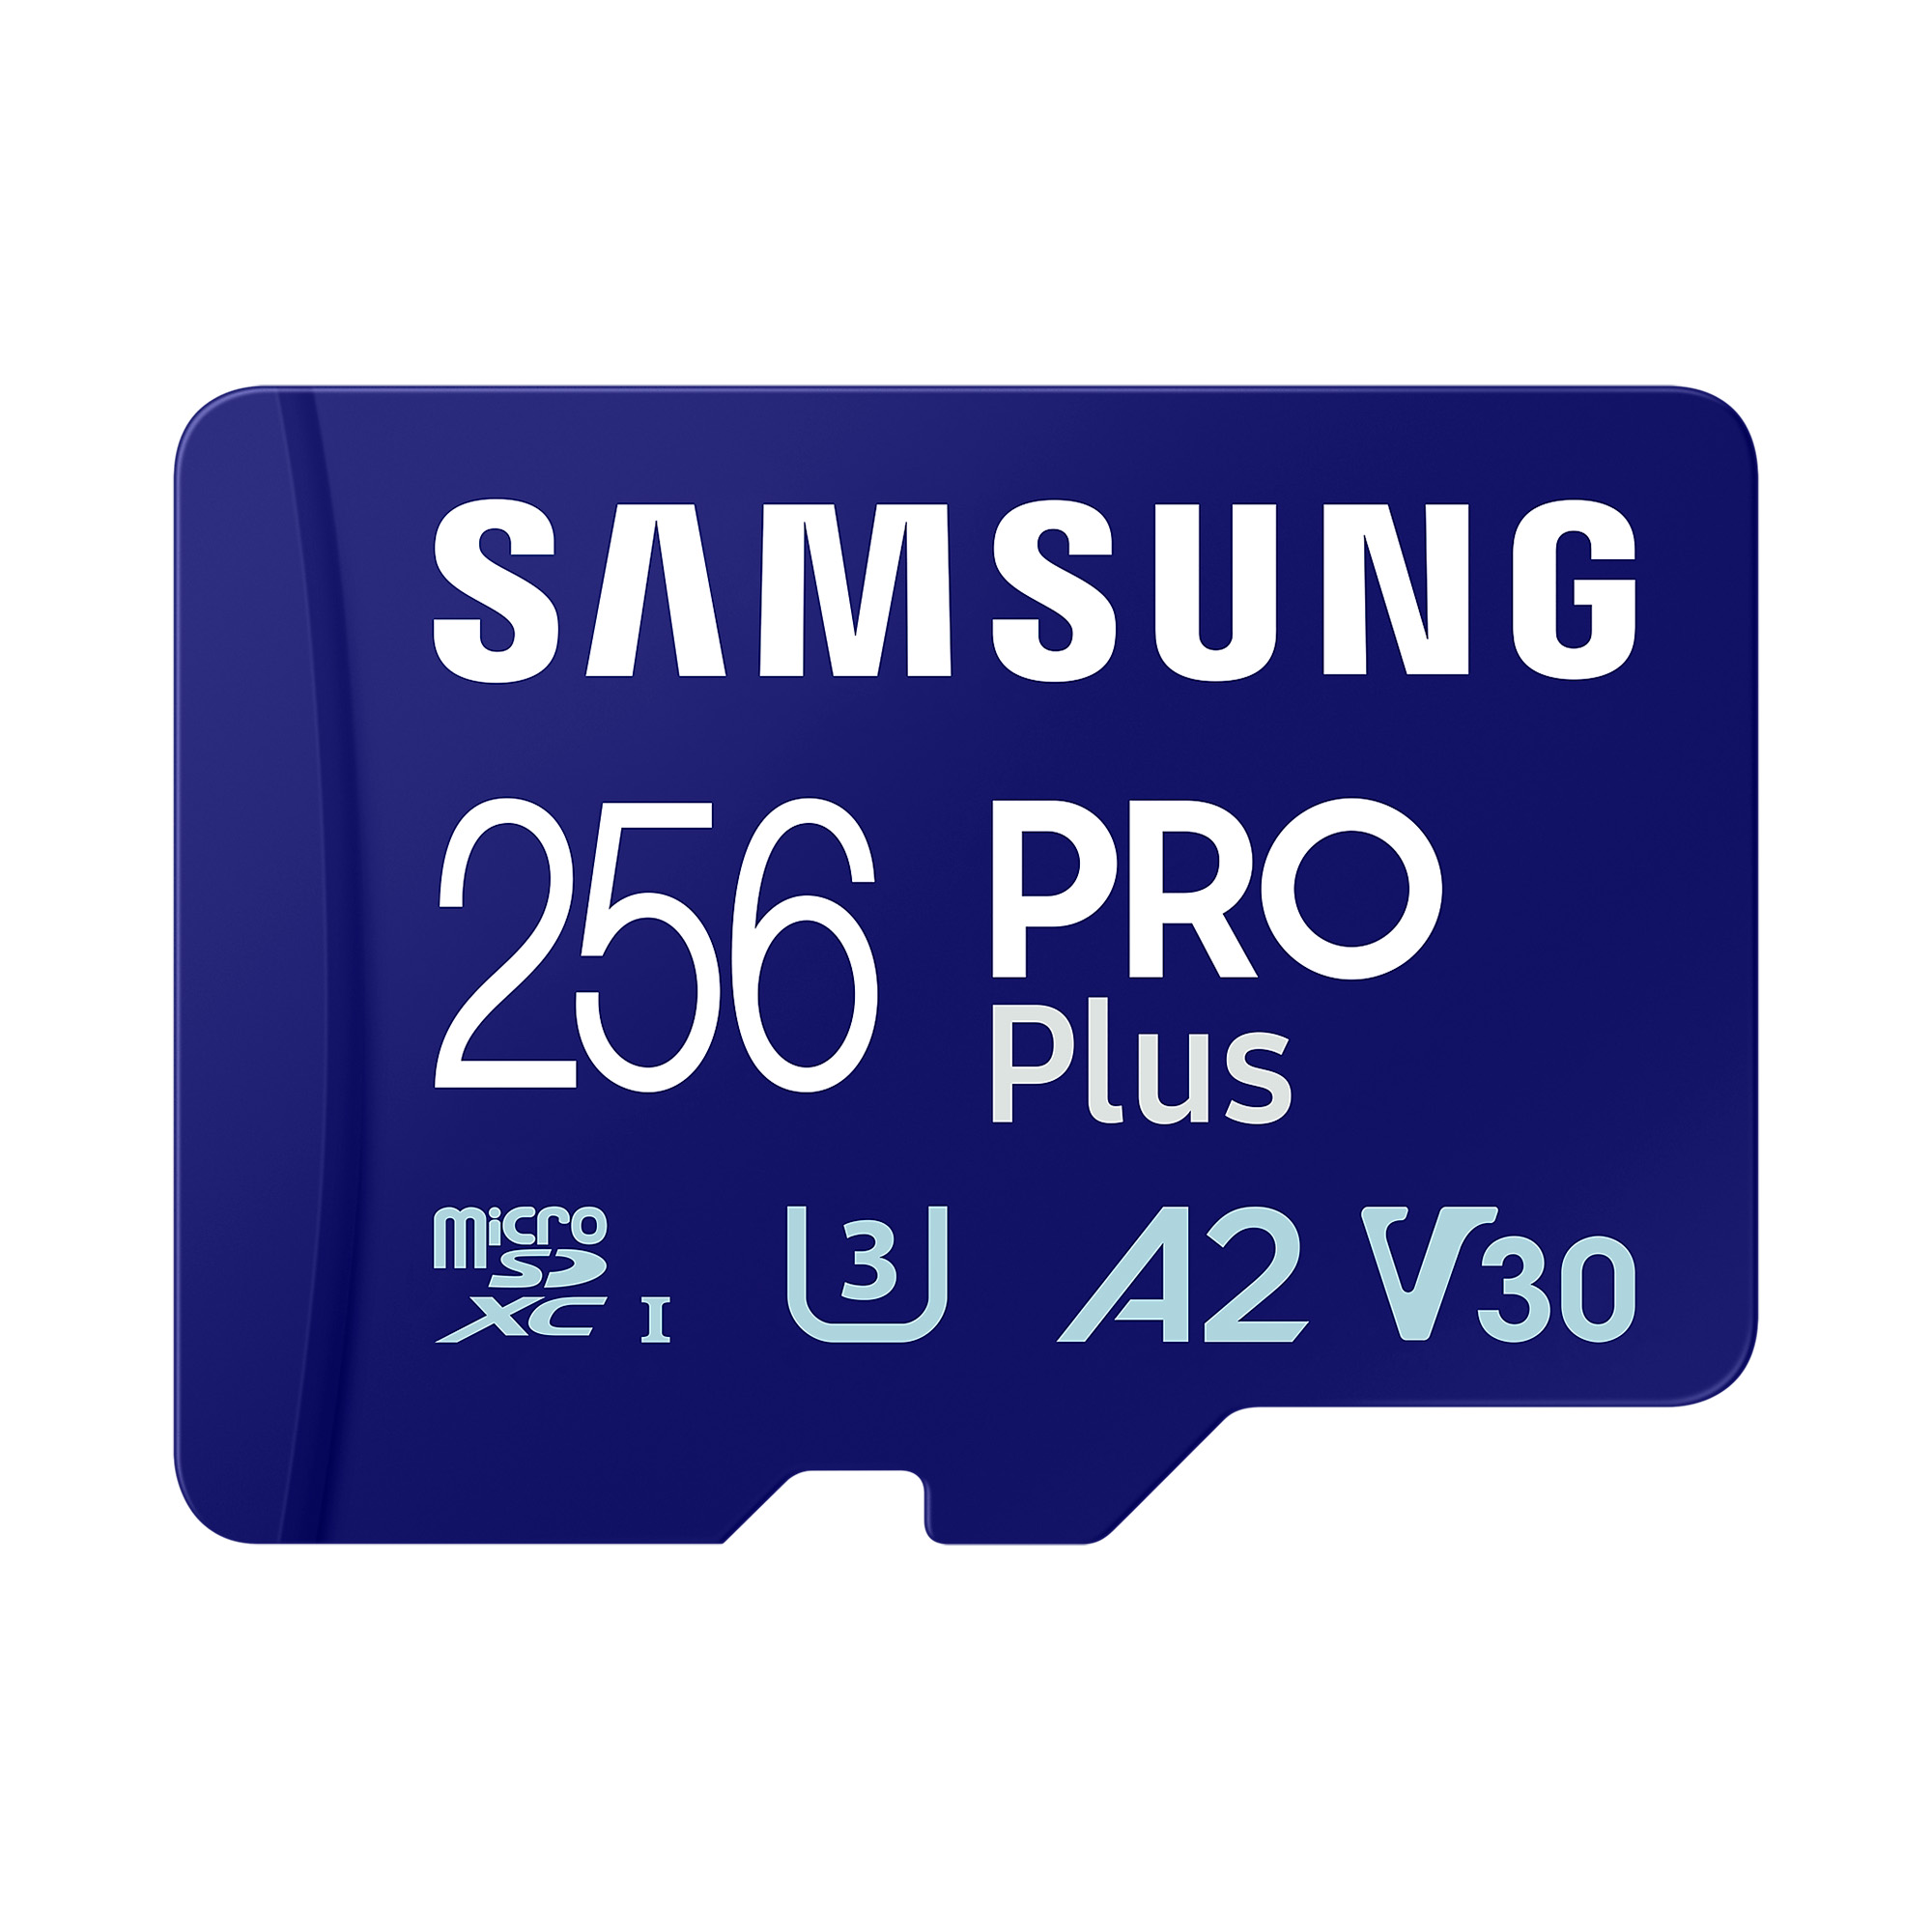 Samsung Updates PRO Plus UHS-I Memory Cards with Improved Speeds